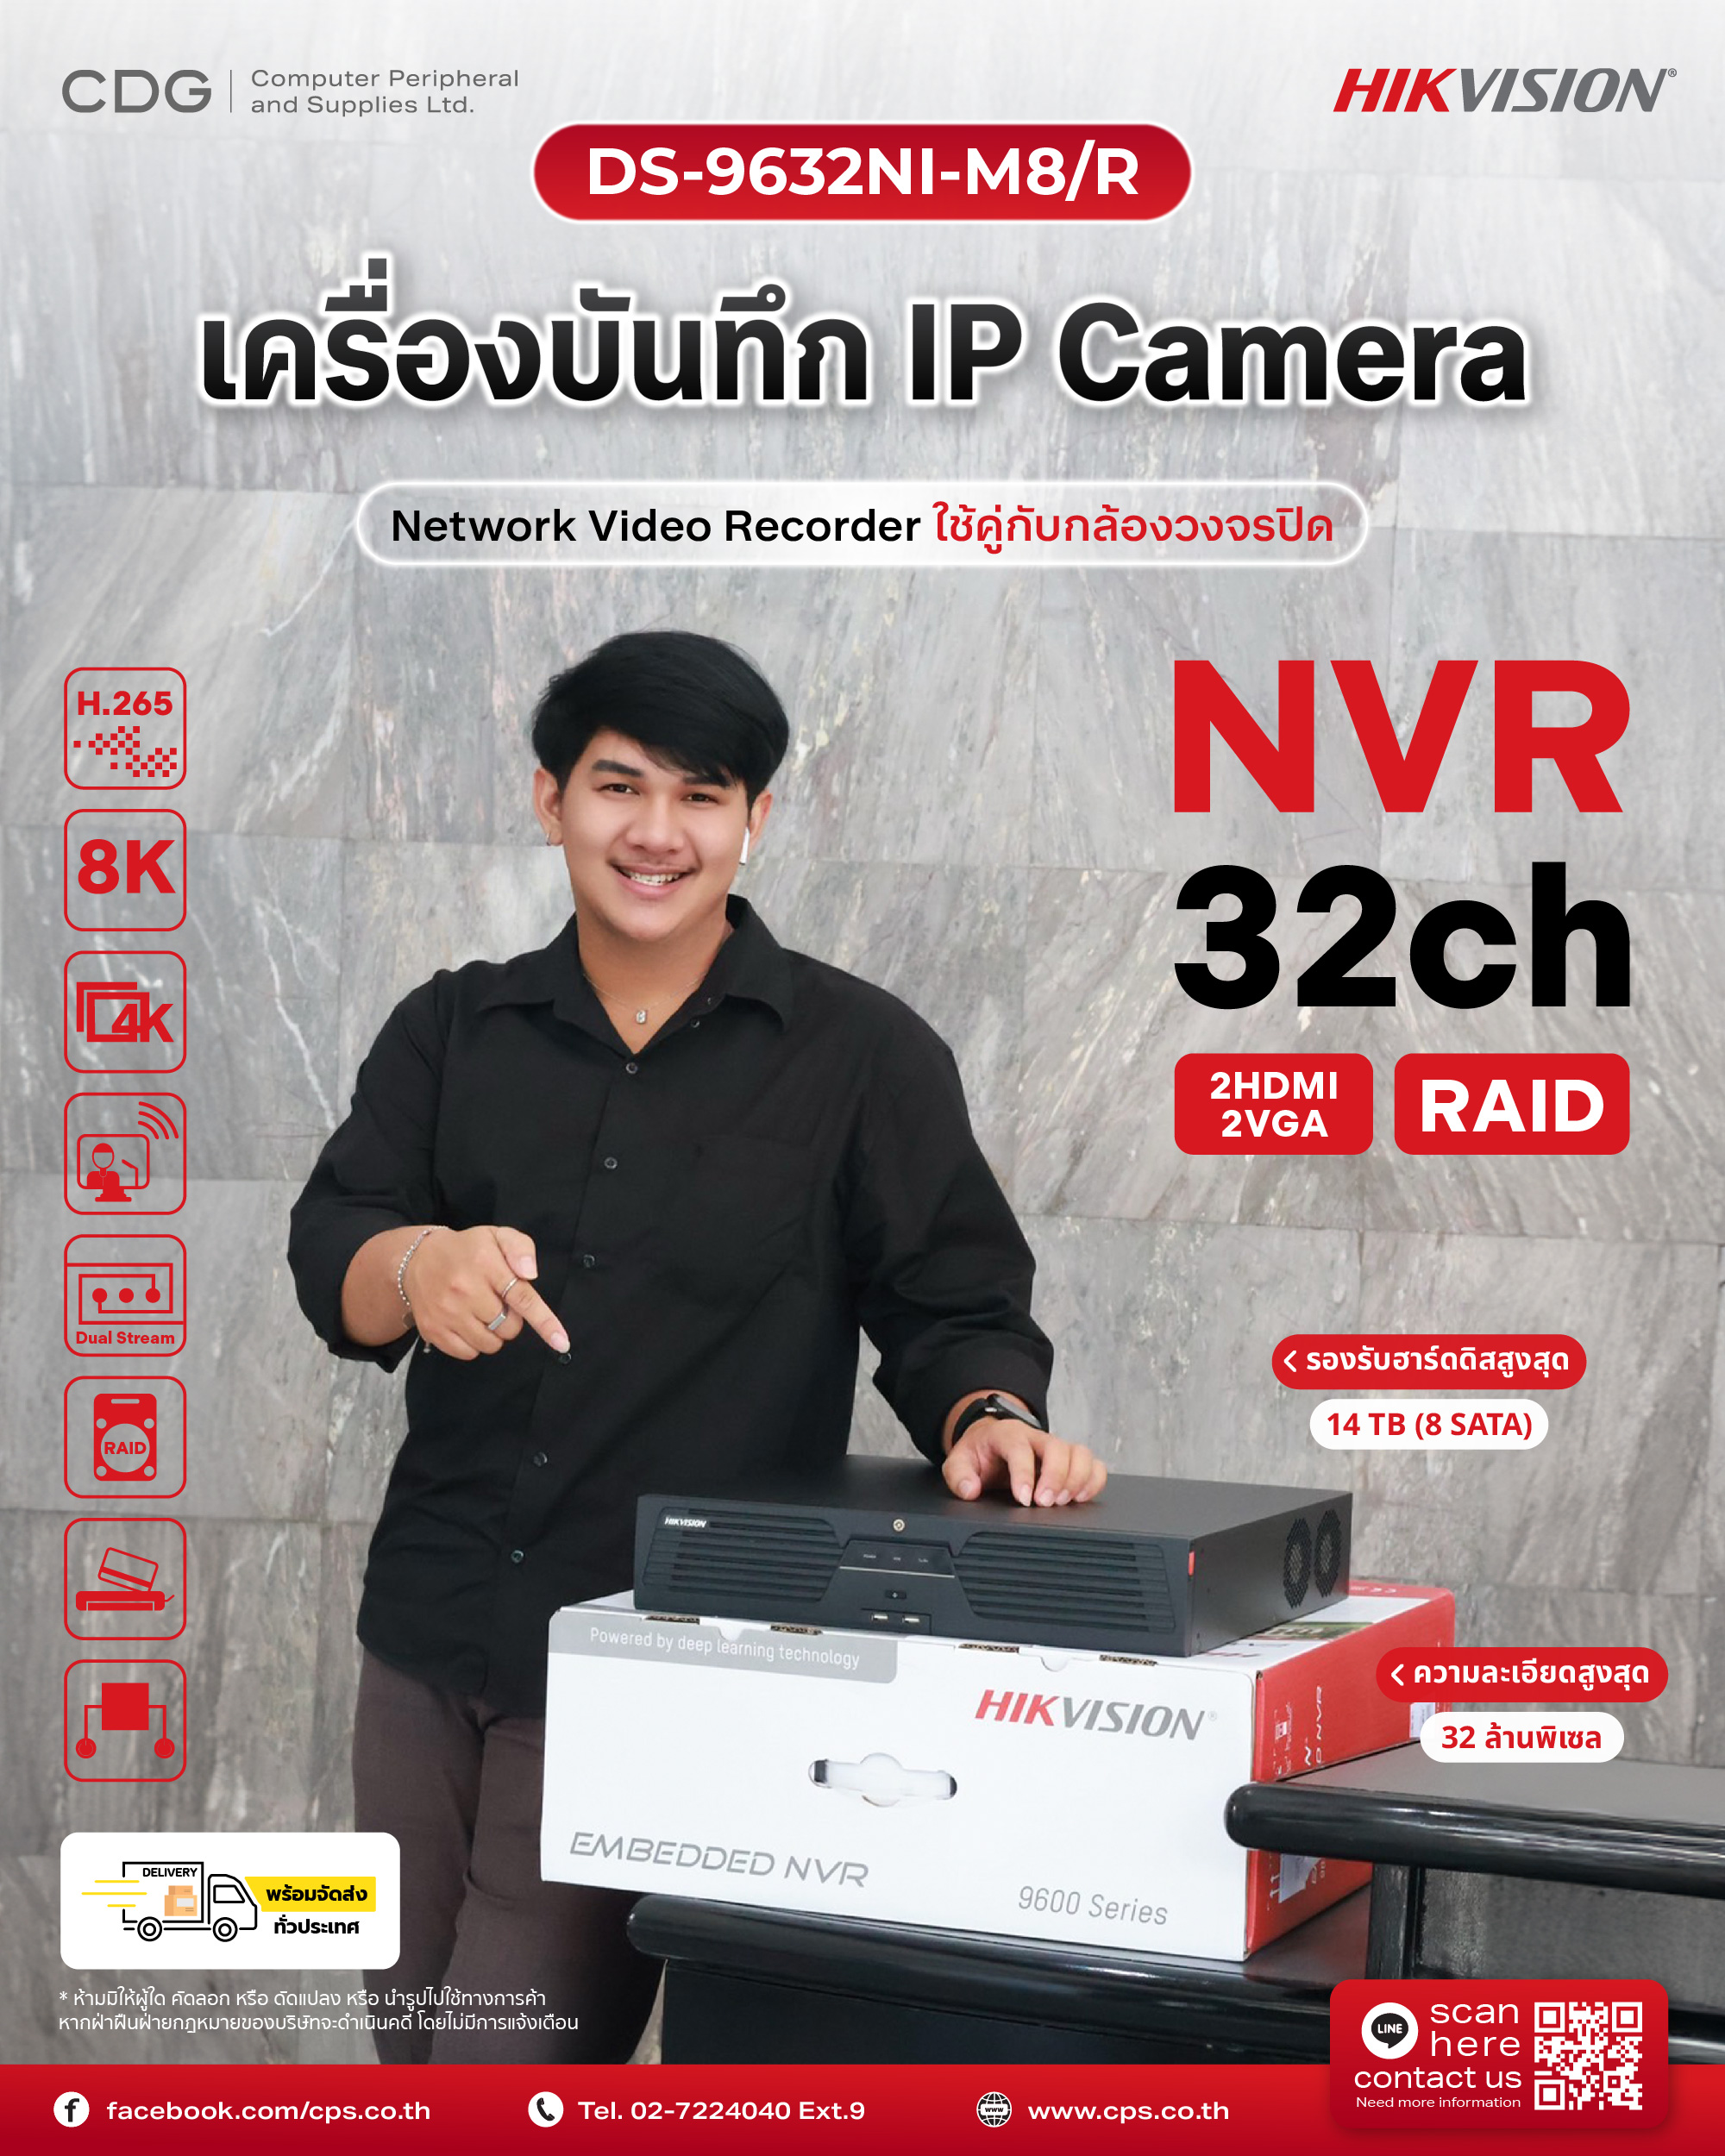 Network Video Recorder Hikvision DS-9632NI-M8/R